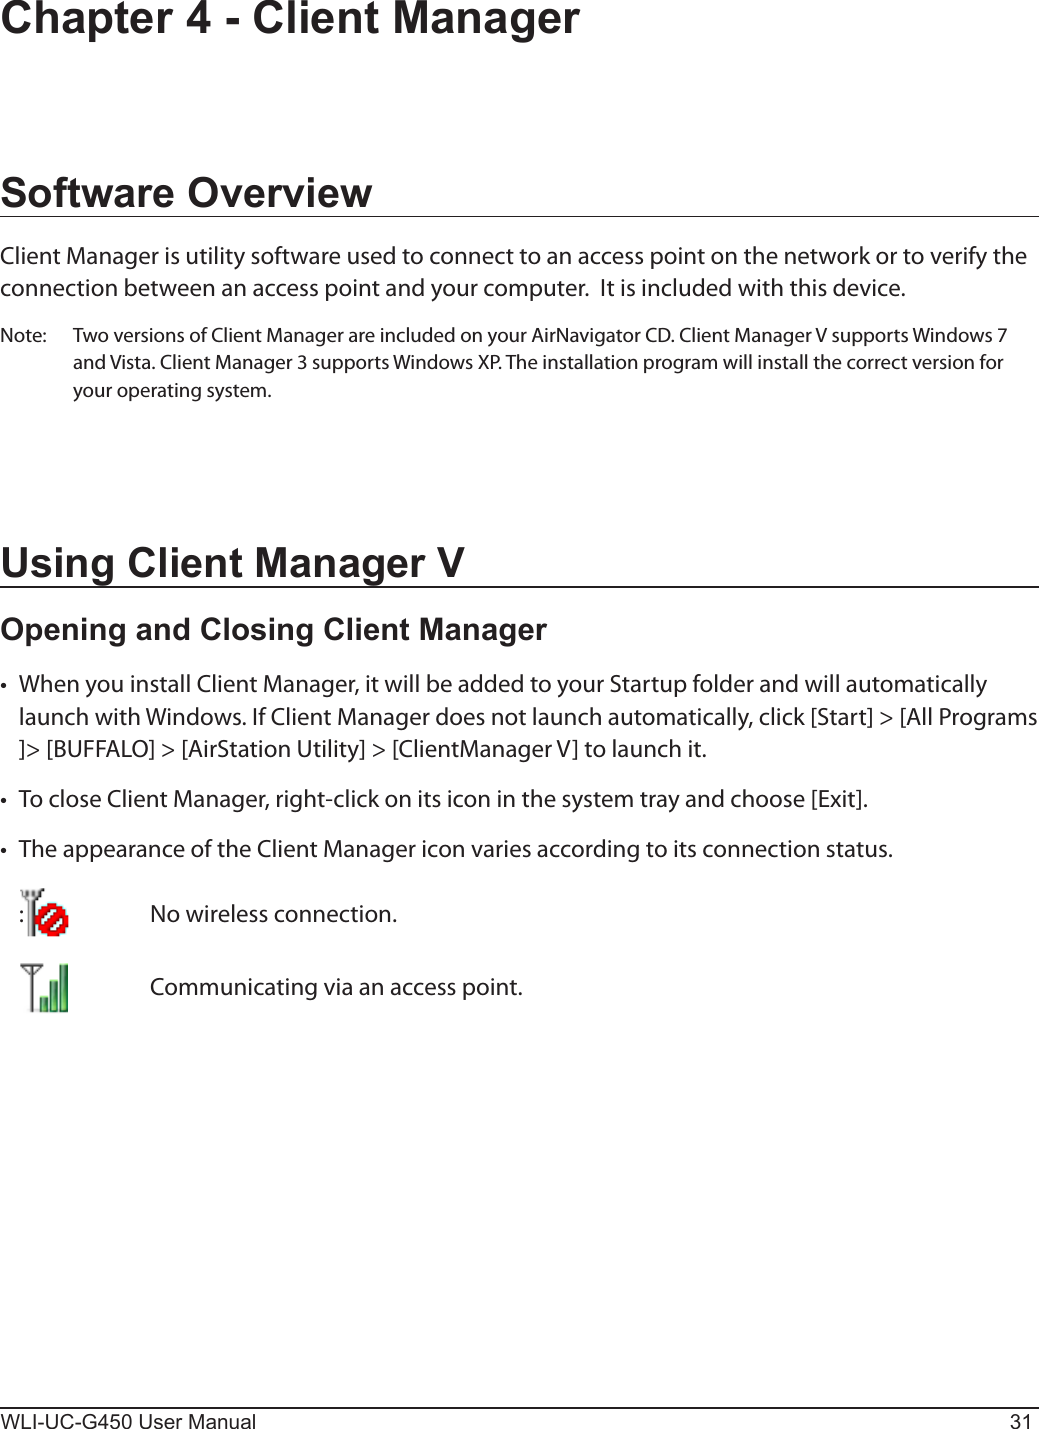 WLI-UC-G450 User Manual 31Chapter 4 - Client ManagerSoftware OverviewClient Manager is utility software used to connect to an access point on the network or to verify the connection between an access point and your computer.  It is included with this device. Note:  Two versions of Client Manager are included on your AirNavigator CD. Client Manager V supports Windows 7 and Vista. Client Manager 3 supports Windows XP. The installation program will install the correct version for your operating system.Using Client Manager VOpening and Closing Client Manager•  When you install Client Manager, it will be added to your Startup folder and will automatically launch with Windows. If Client Manager does not launch automatically, click [Start] &gt; [All Programs ]&gt; [BUFFALO] &gt; [AirStation Utility] &gt; [ClientManager V] to launch it.•  To close Client Manager, right-click on its icon in the system tray and choose [Exit].•  The appearance of the Client Manager icon varies according to its connection status.  :    No wireless connection.       Communicating via an access point.